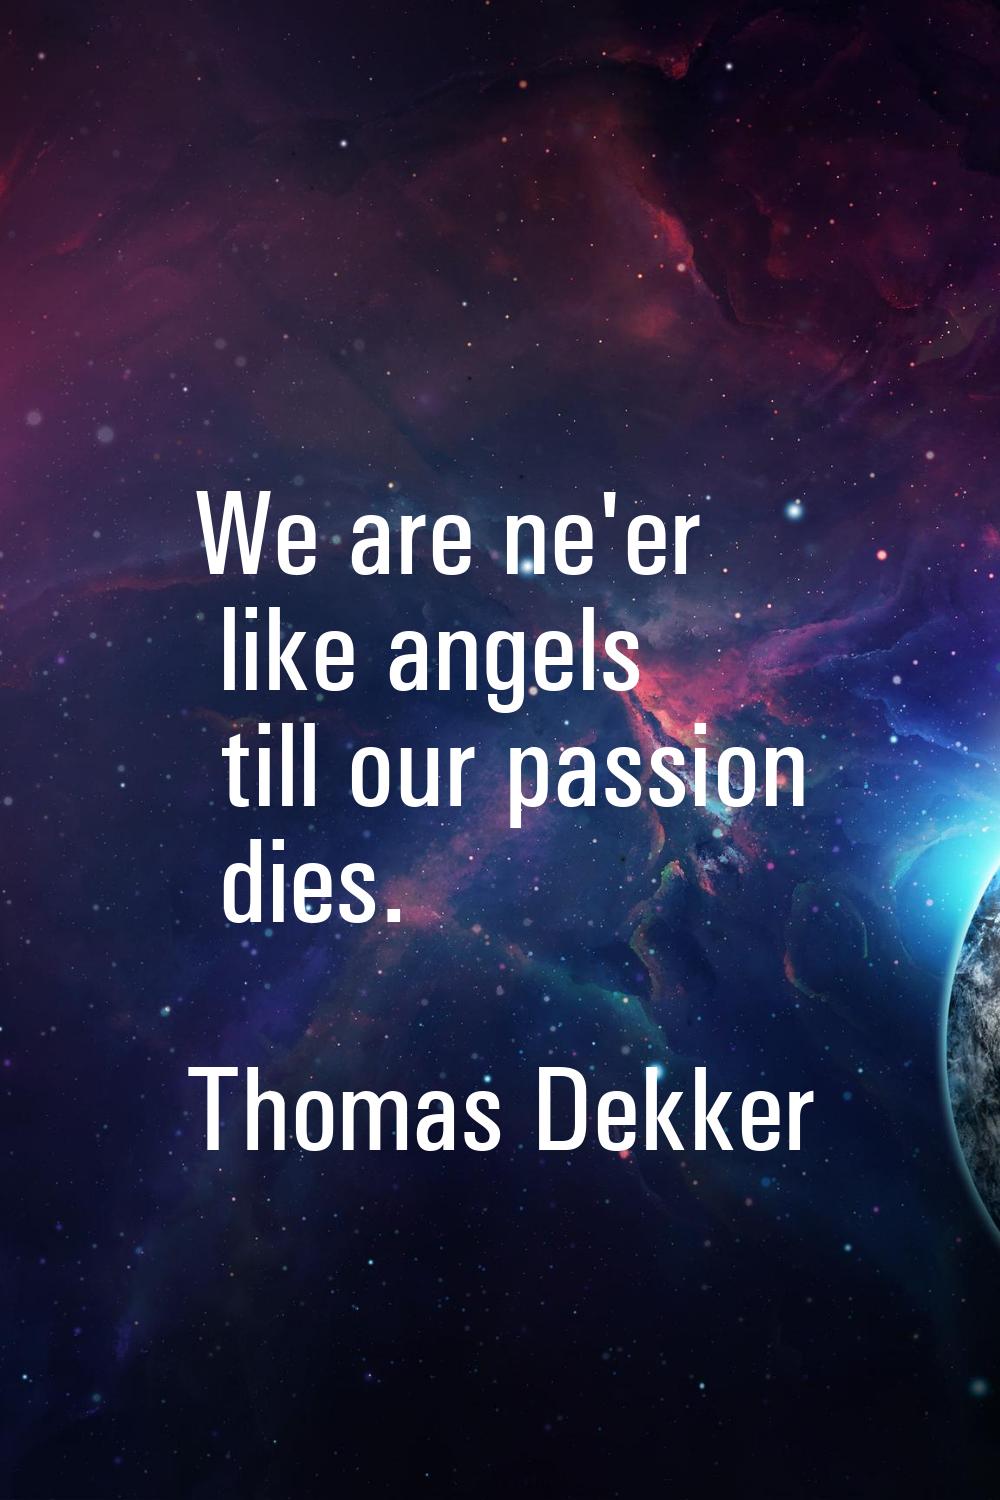 We are ne'er like angels till our passion dies.